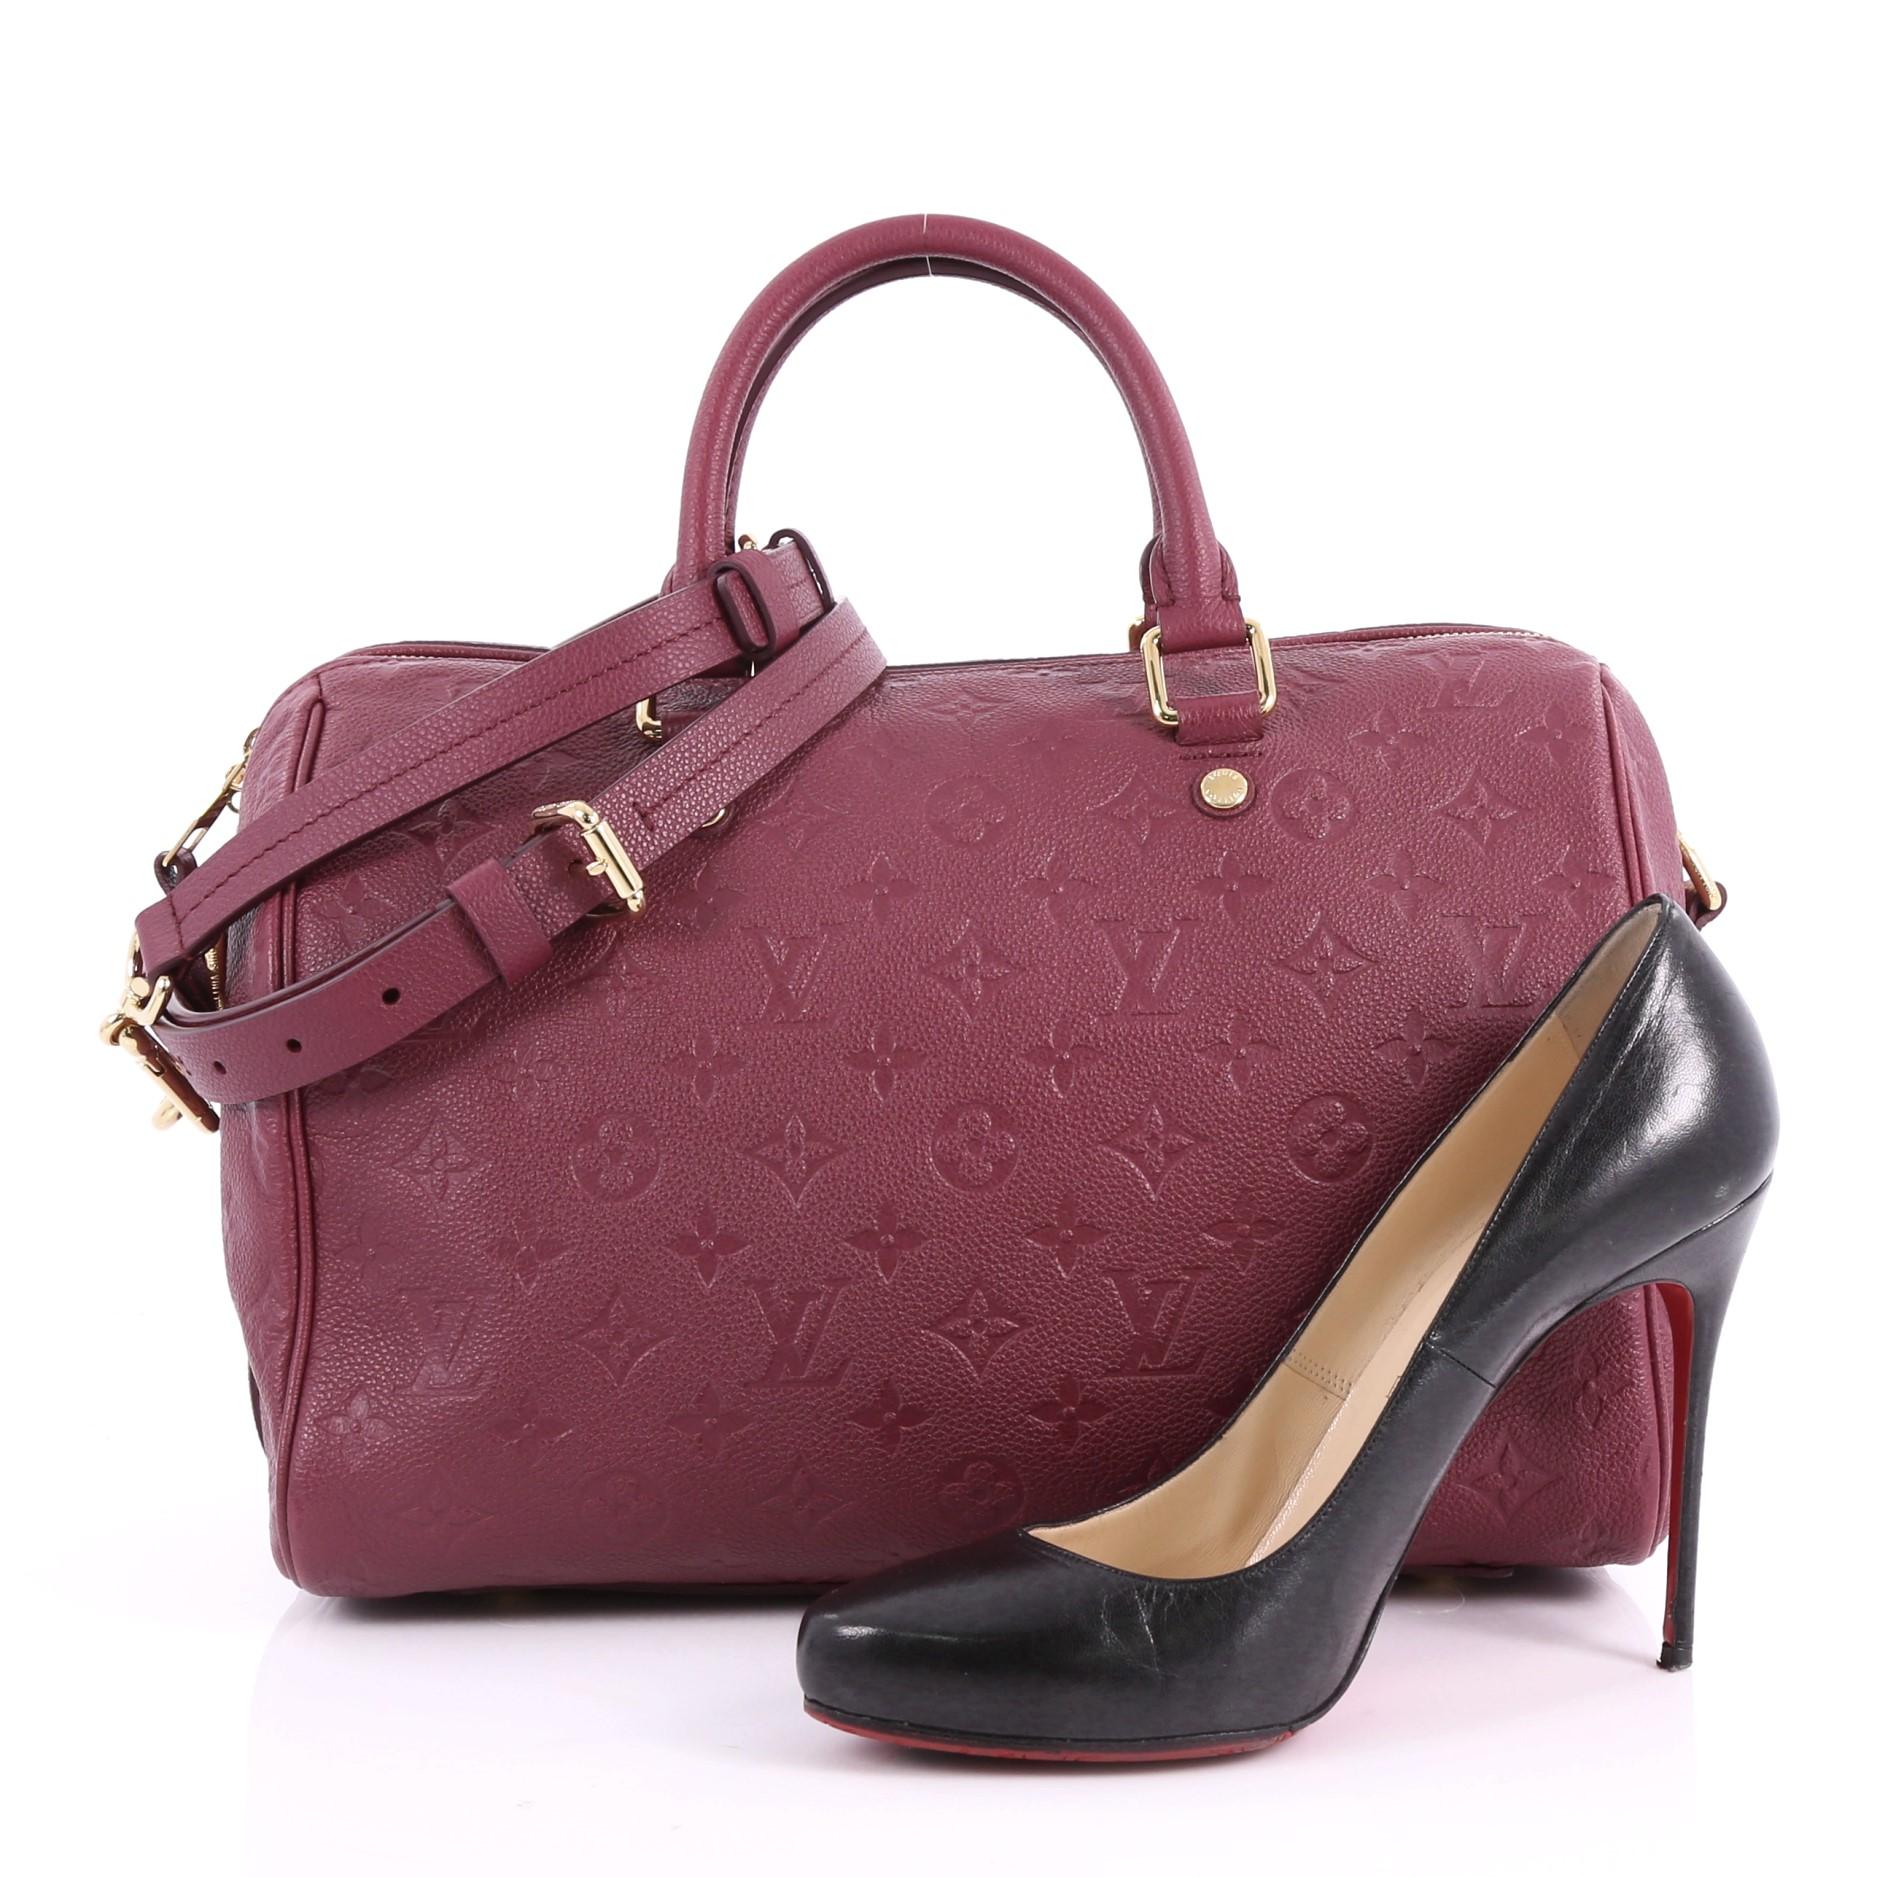 This Louis Vuitton Speedy Bandouliere Bag Monogram Empreinte Leather 30, crafted in plum monogram empreinte leather, features dual rolled leather handles, protective base studs and gold-tone hardware. Its two-way zip closure opens to a plum fabric